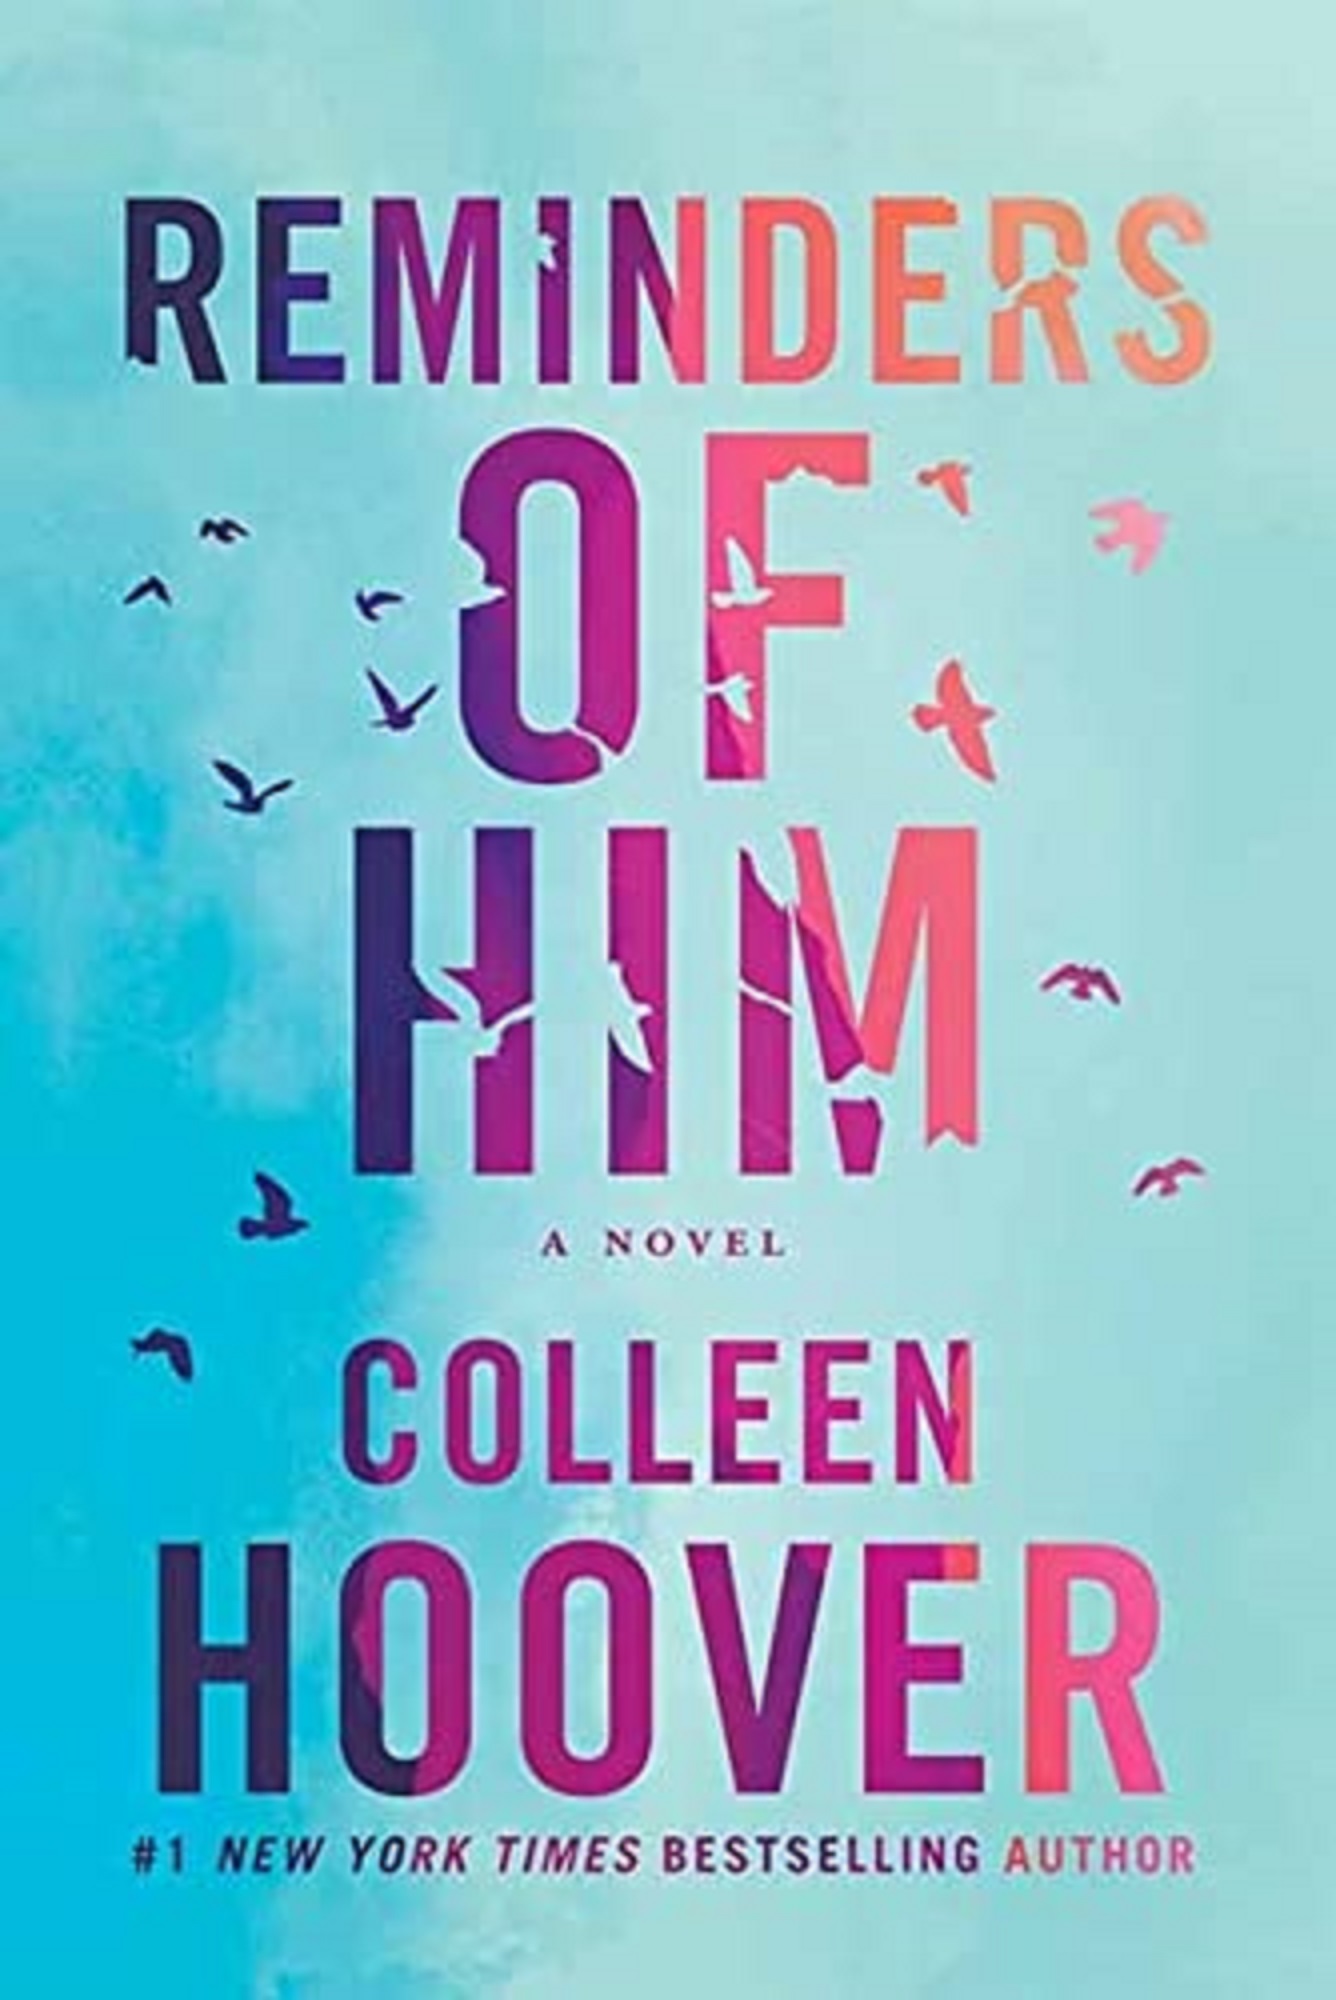 Reminders of Him | Colleen Hoover